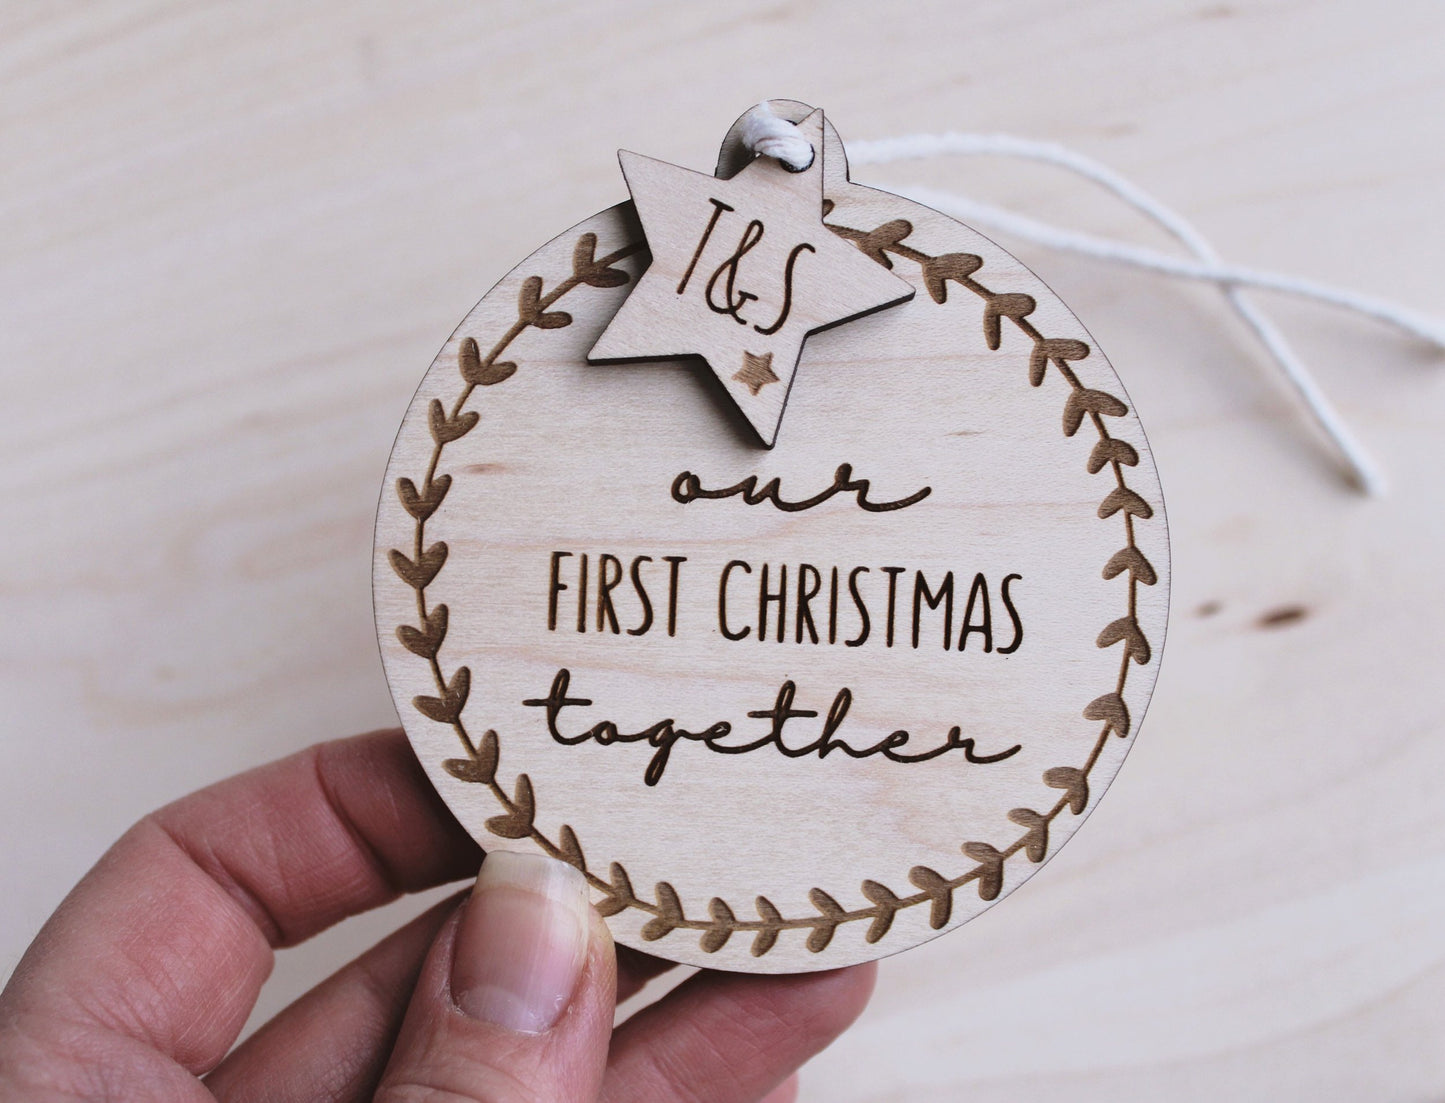 Our First Christmas Together personalised bauble decoration